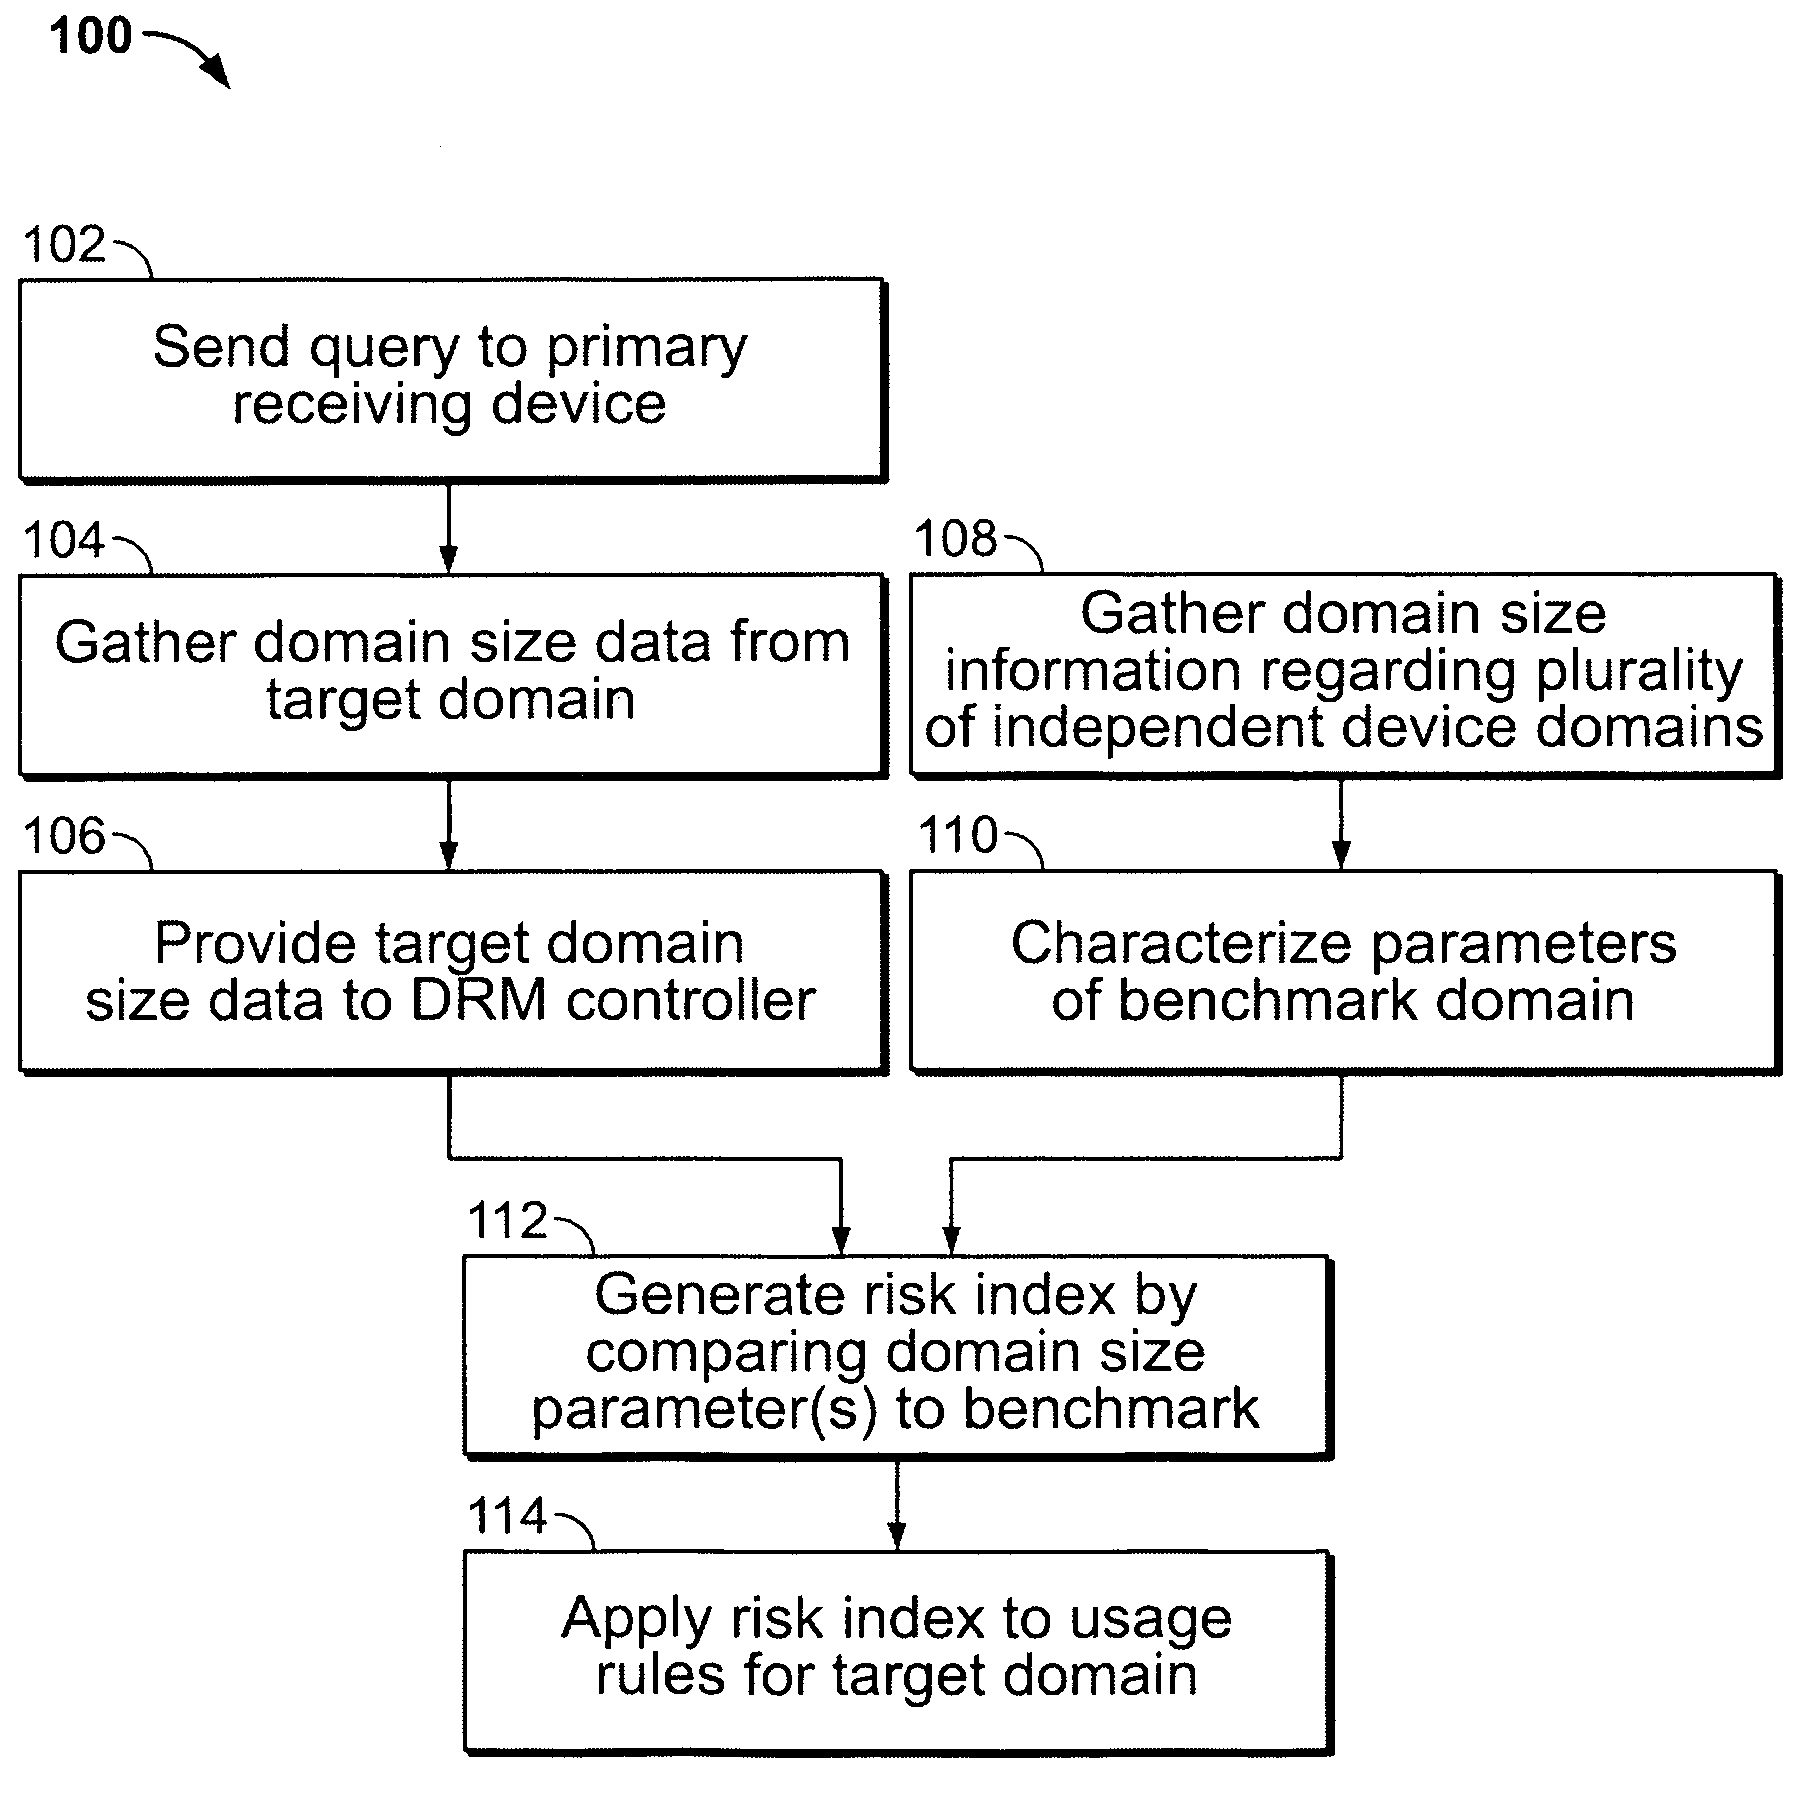 Adaptive digital rights management system for plural device domains